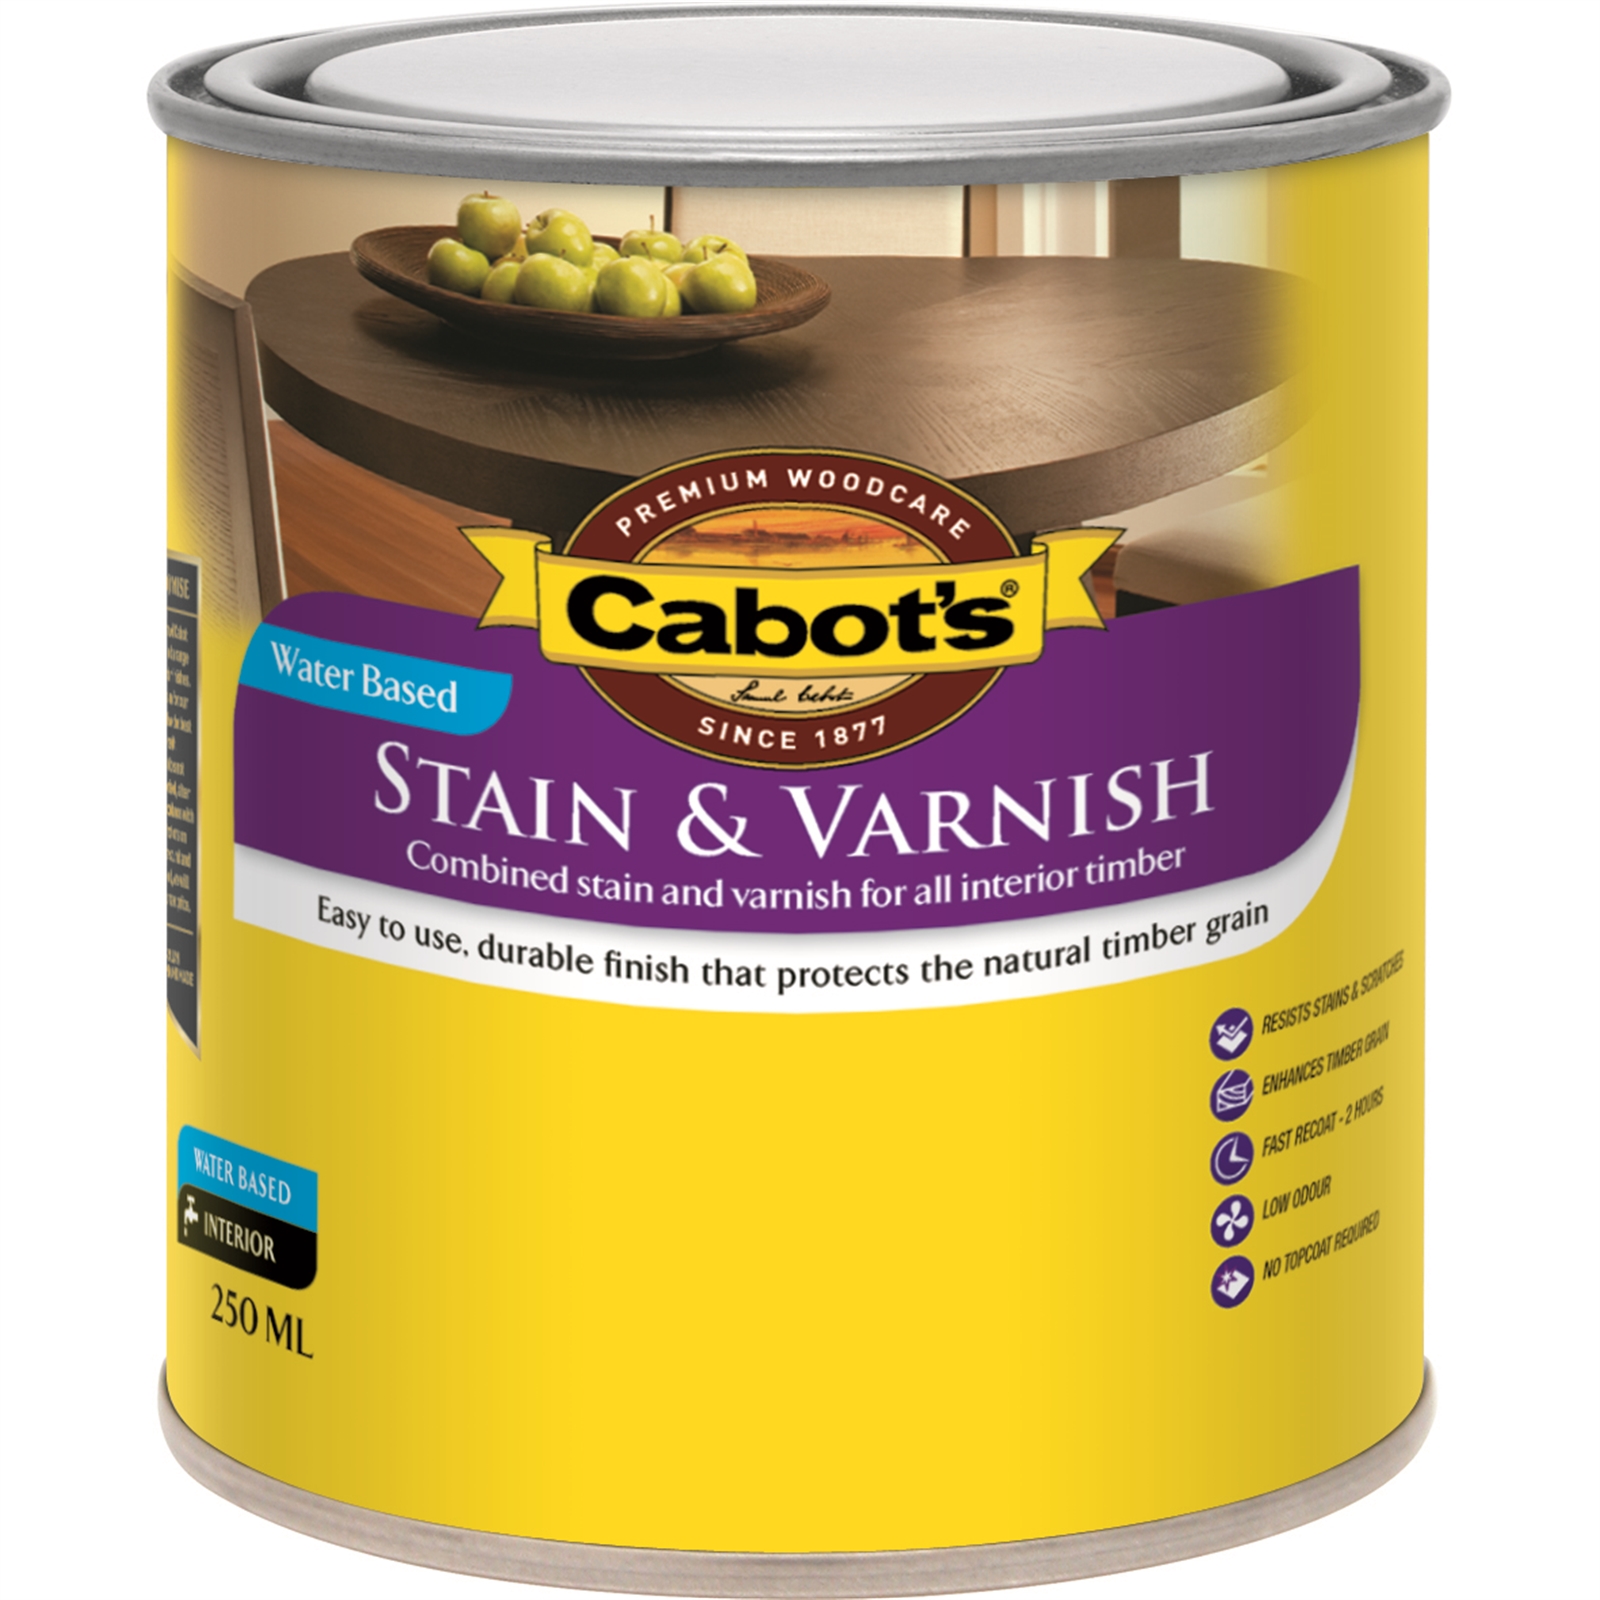 Cabot's 250ml Gloss Tint Base Water Based Stain and Varnish